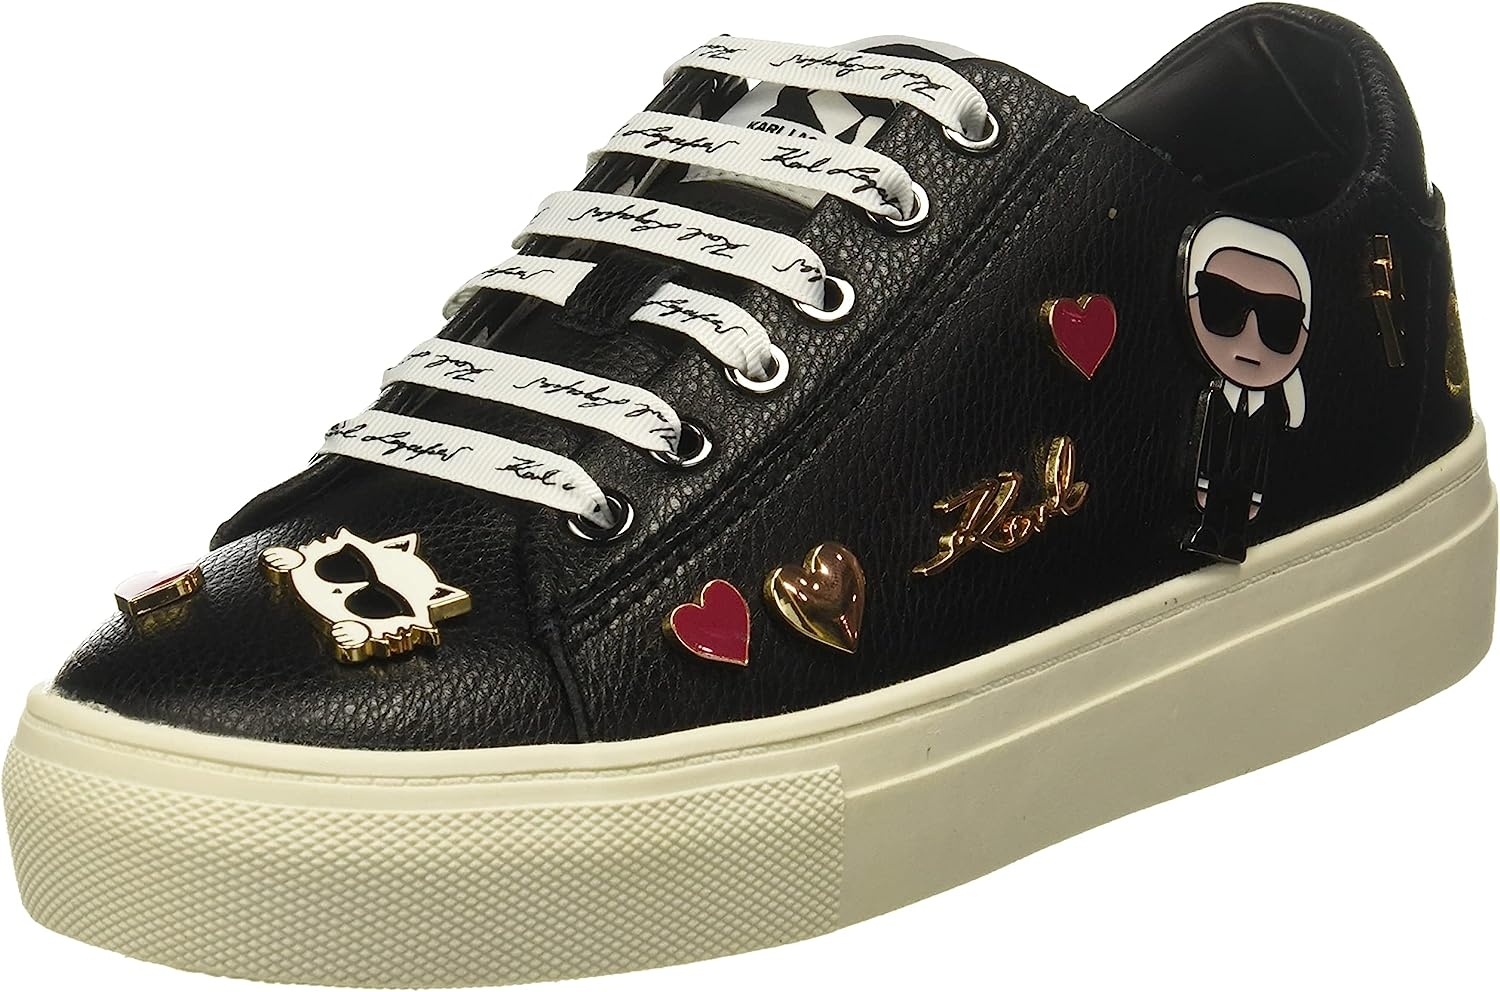 Karl Lagerfeld Paris Women’s Cate Shoes – Sneakers Iconic Klp Pins   price checker   price checker Description Gallery